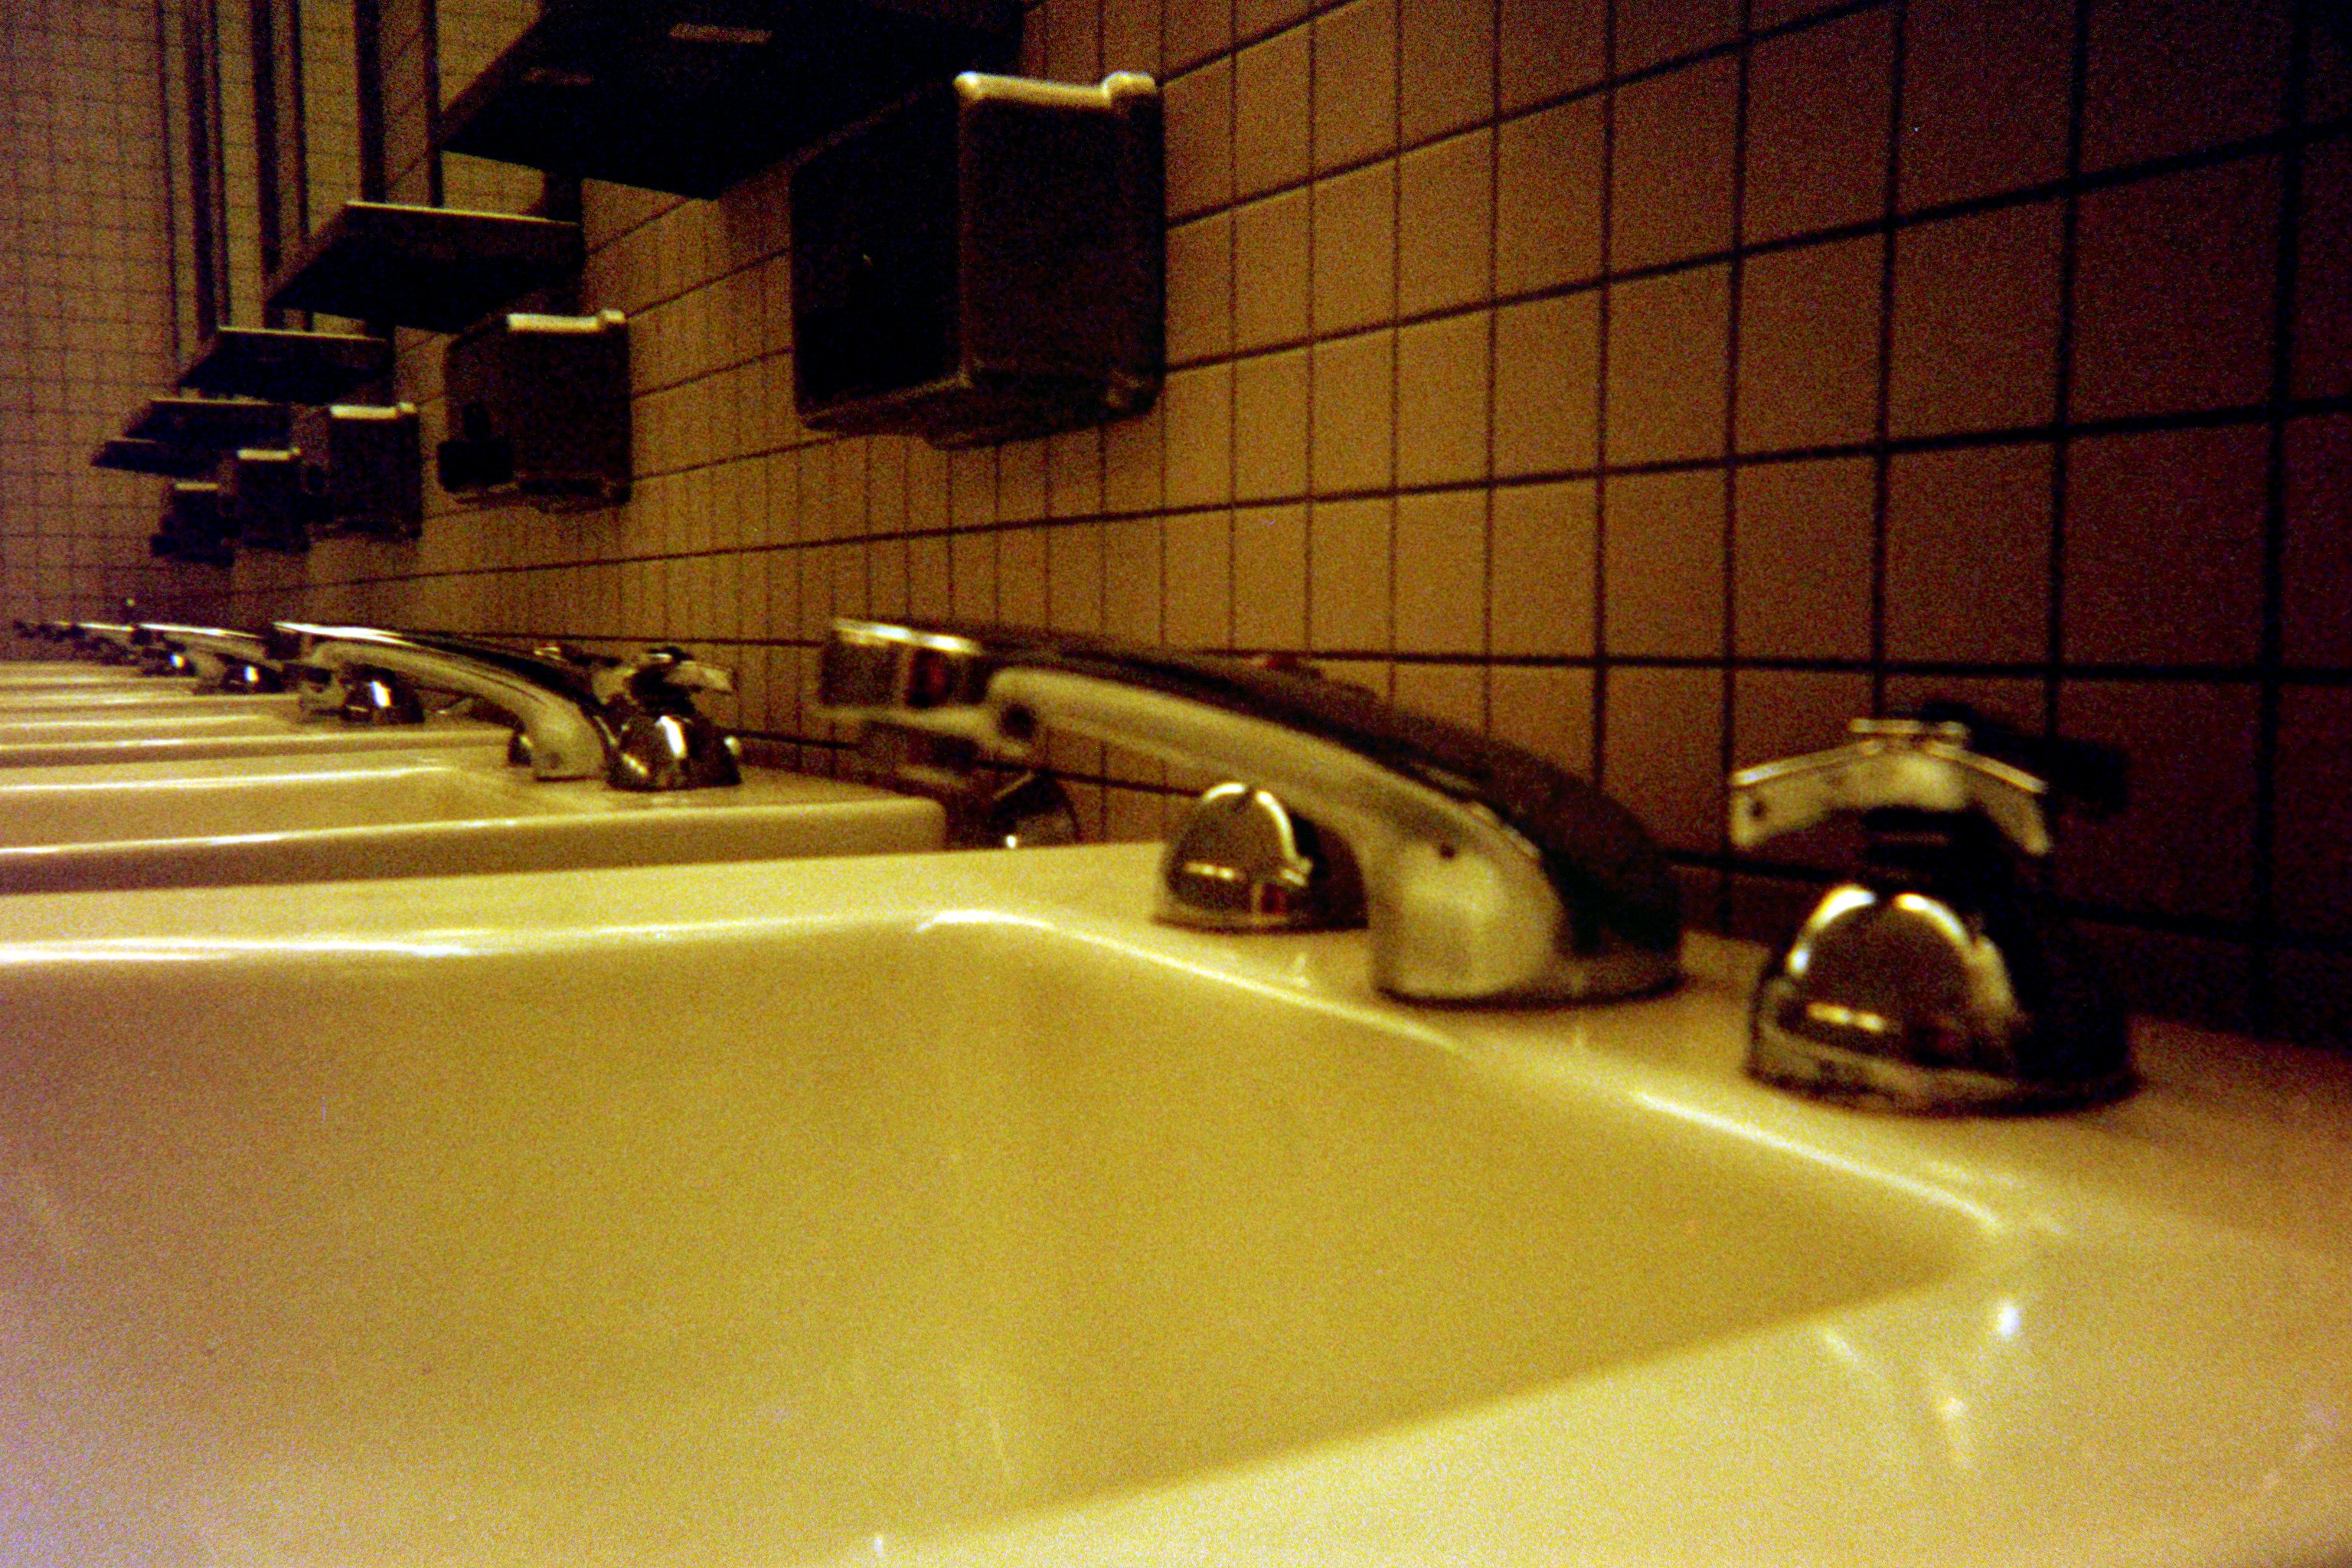 Sinks in a row